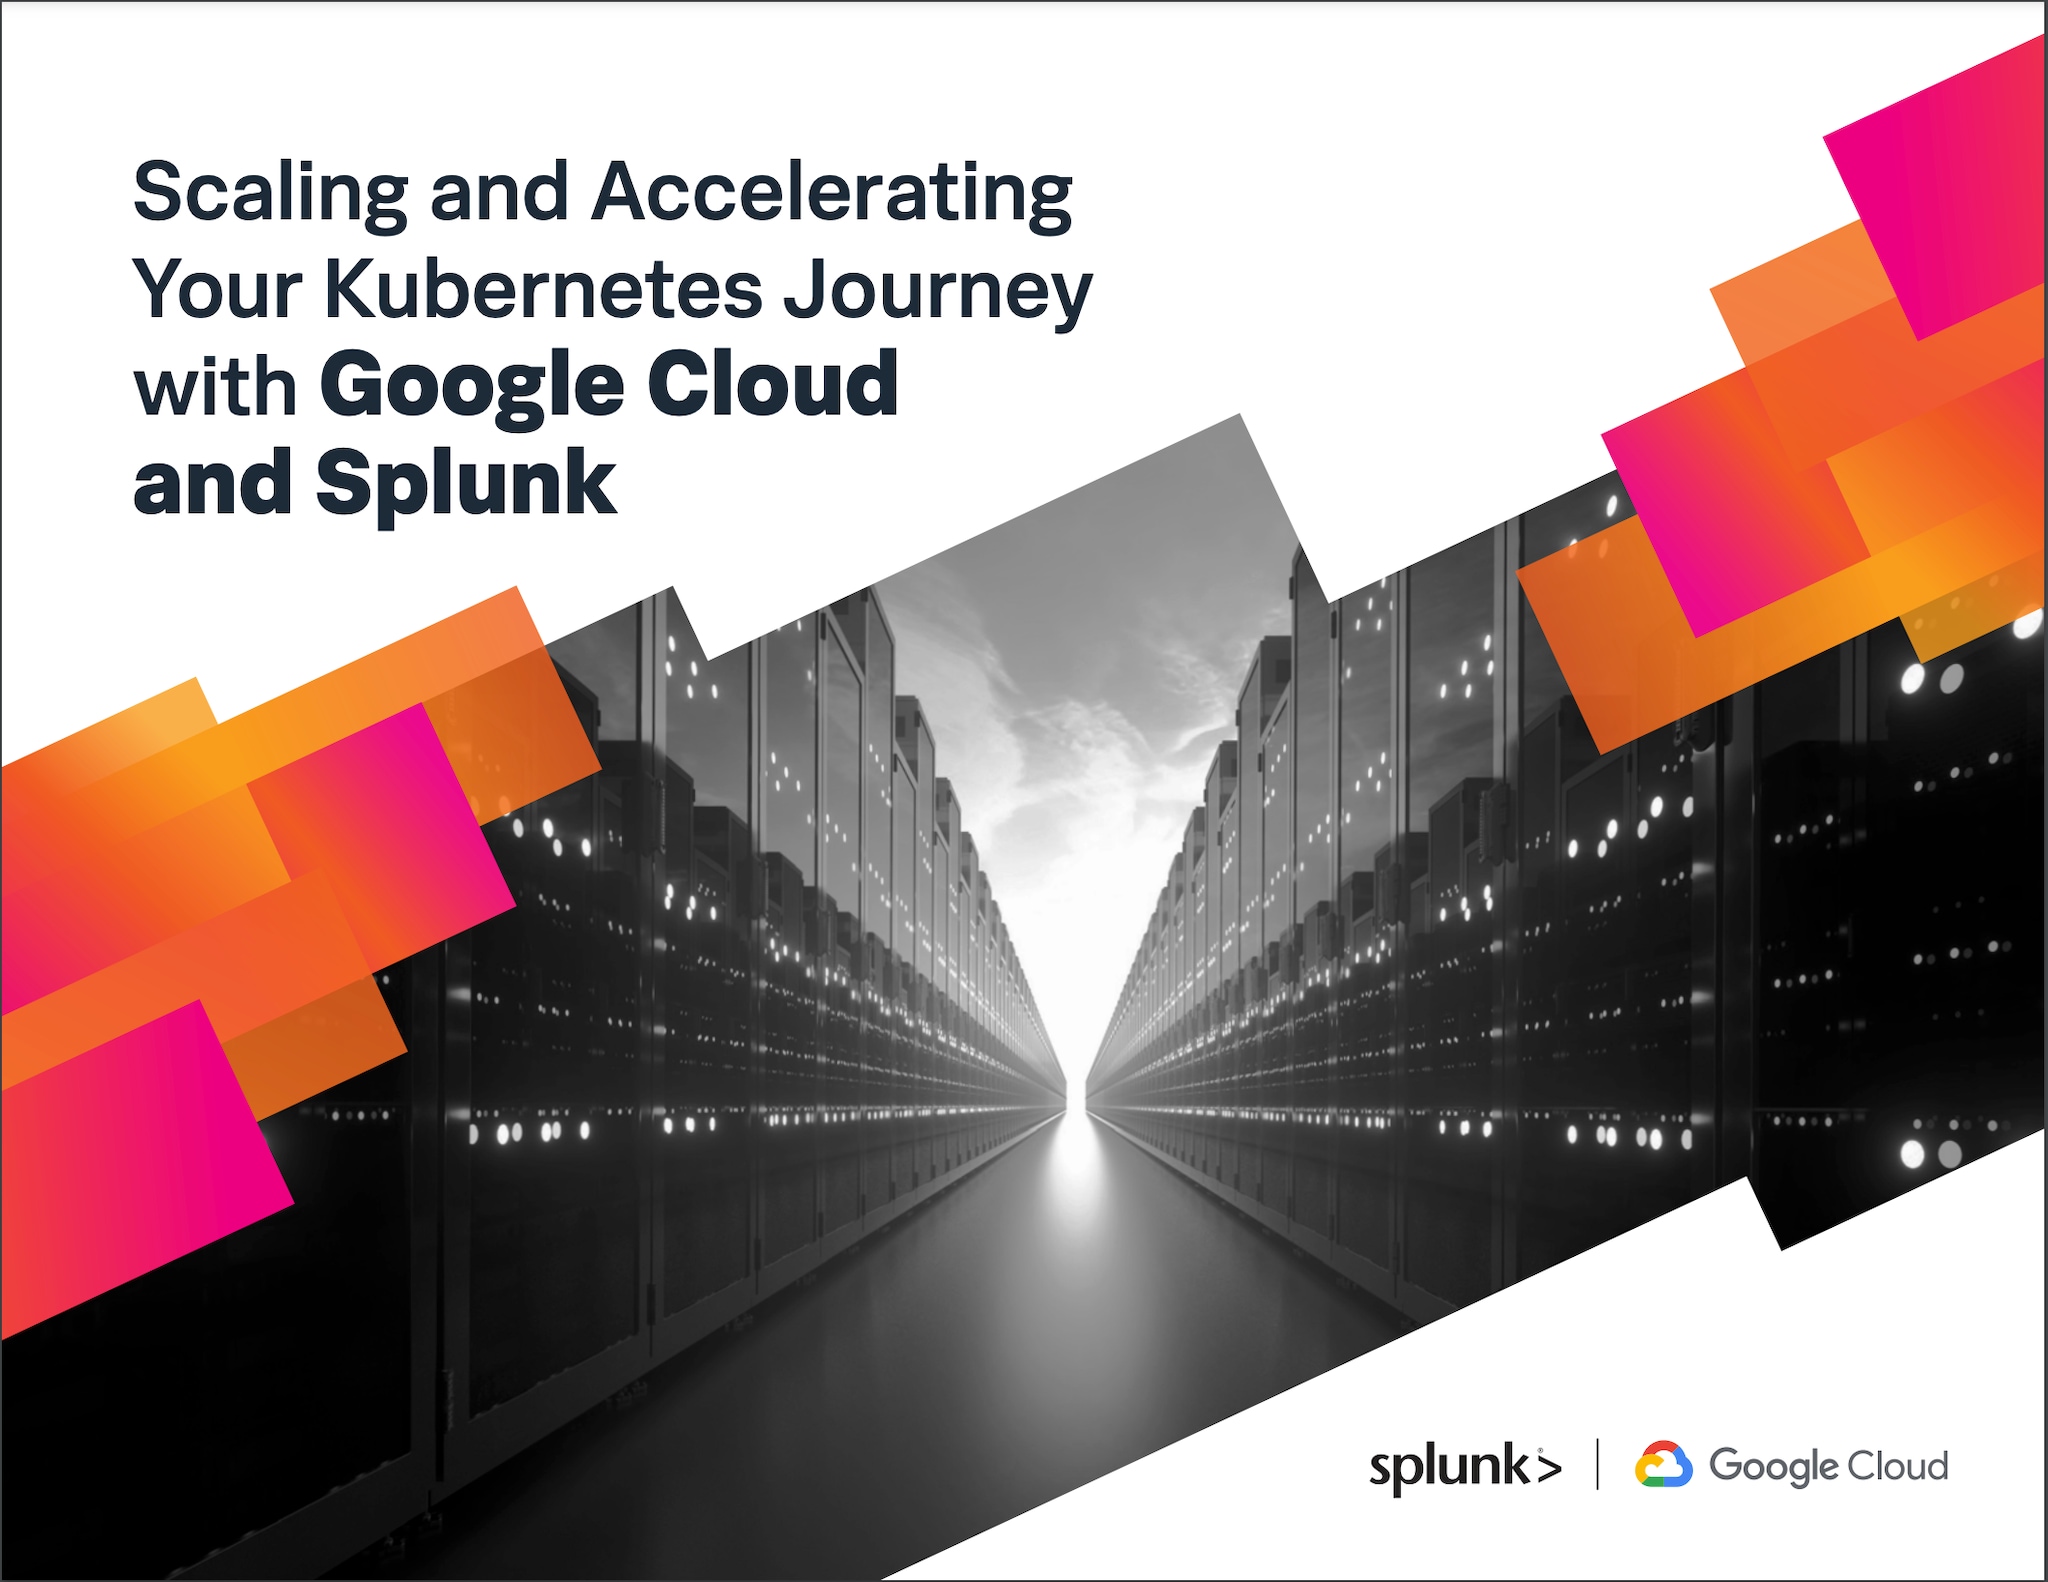 Scaling and Accelerating Your Kubernetes Journey With Google Cloud and Splunk